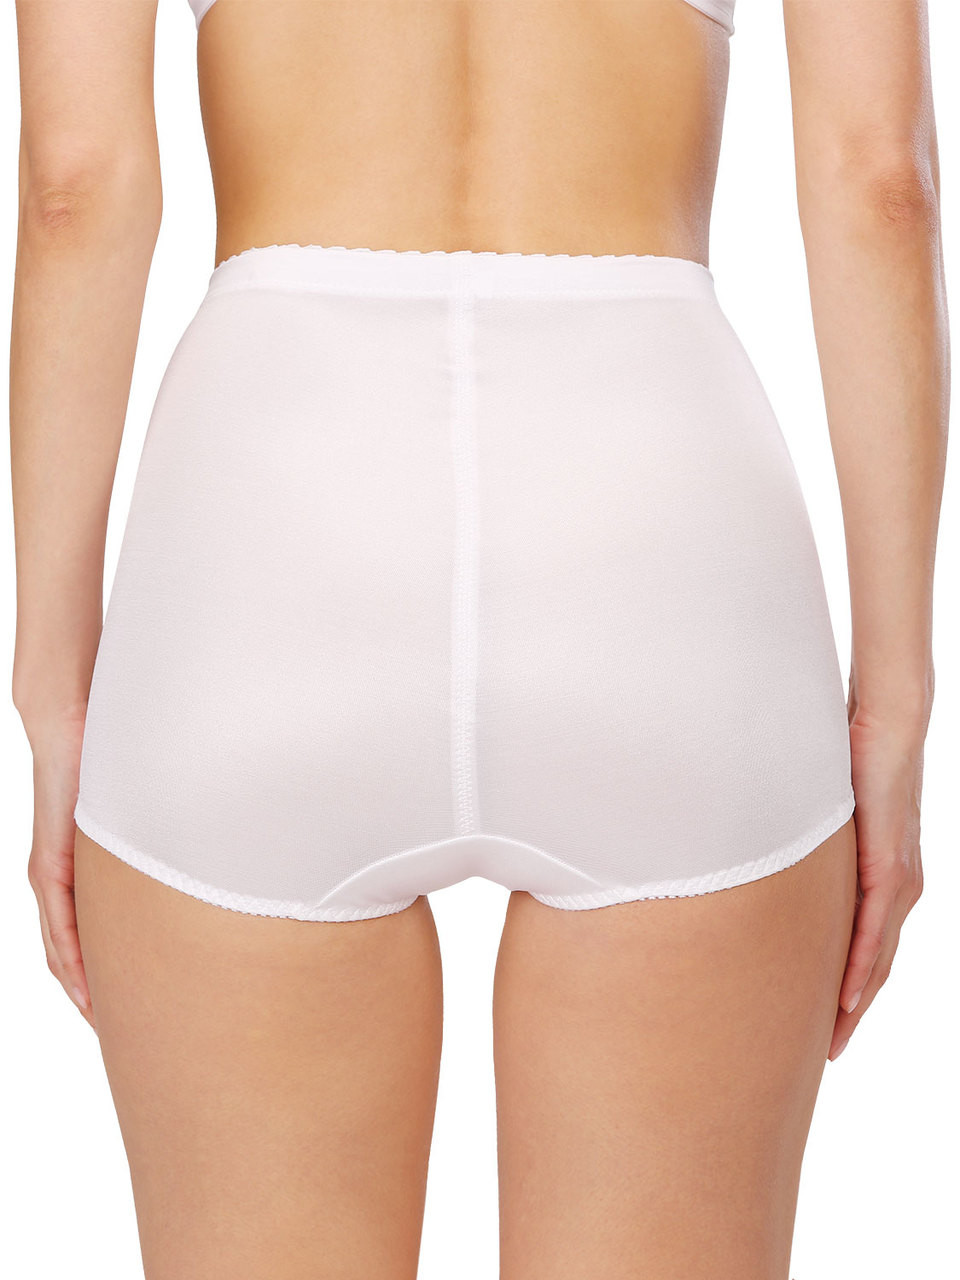 Naturana Double Reinforced Front Panty Girdle with Supporting Seams 0029